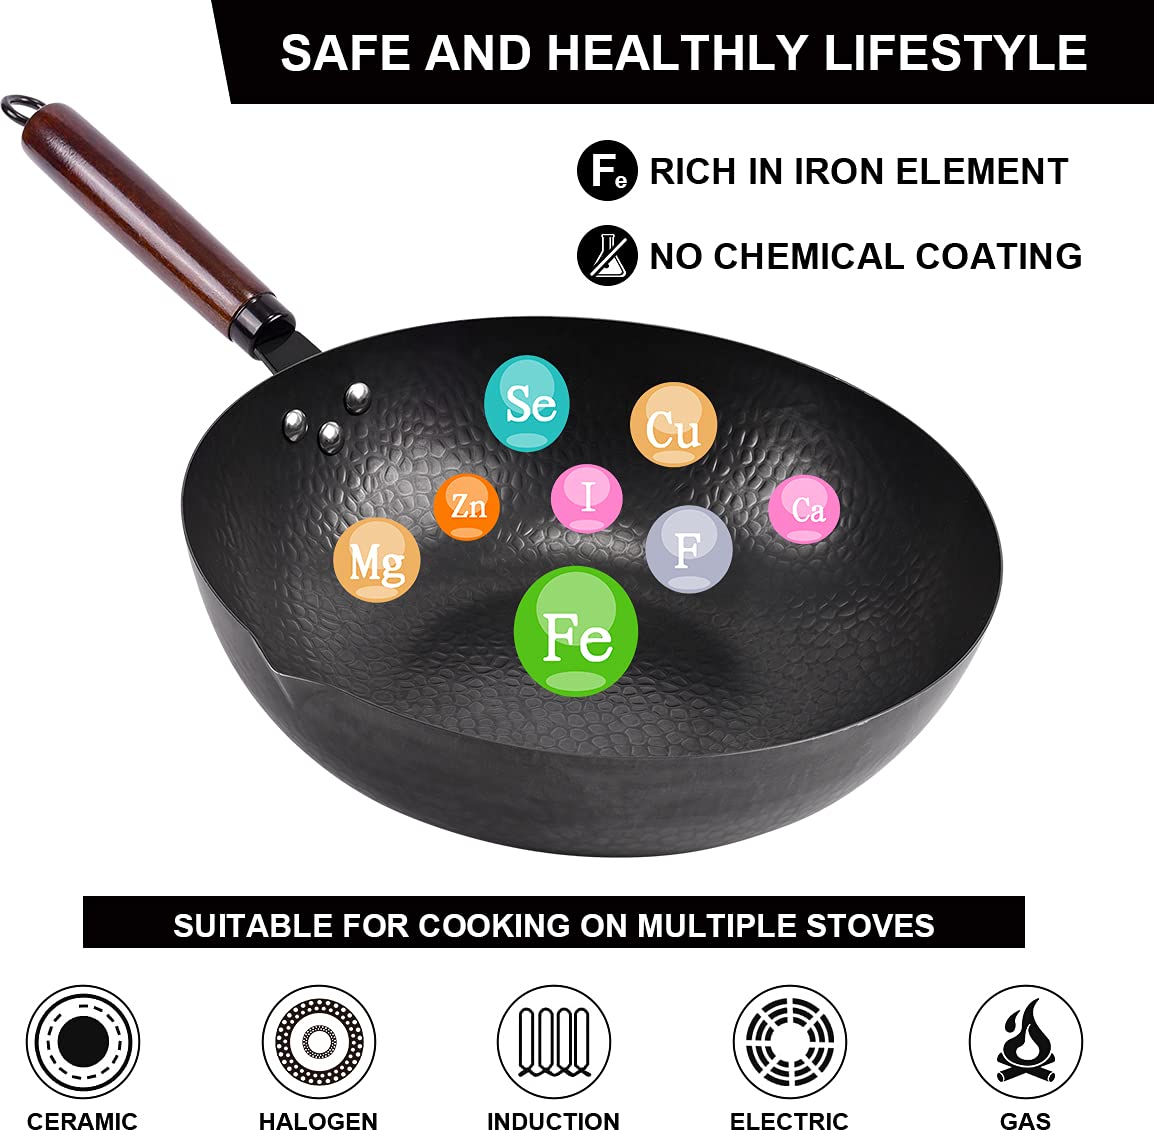 12.8" Carbon Steel Wok-11Pcs Woks & Stir Fry Pans Wok Pan with Lid, No Chemical Coated Chinese Wok with 10 Cookware Accessories, Flat Bottom Wok for Electric, Induction,Gas Stoves